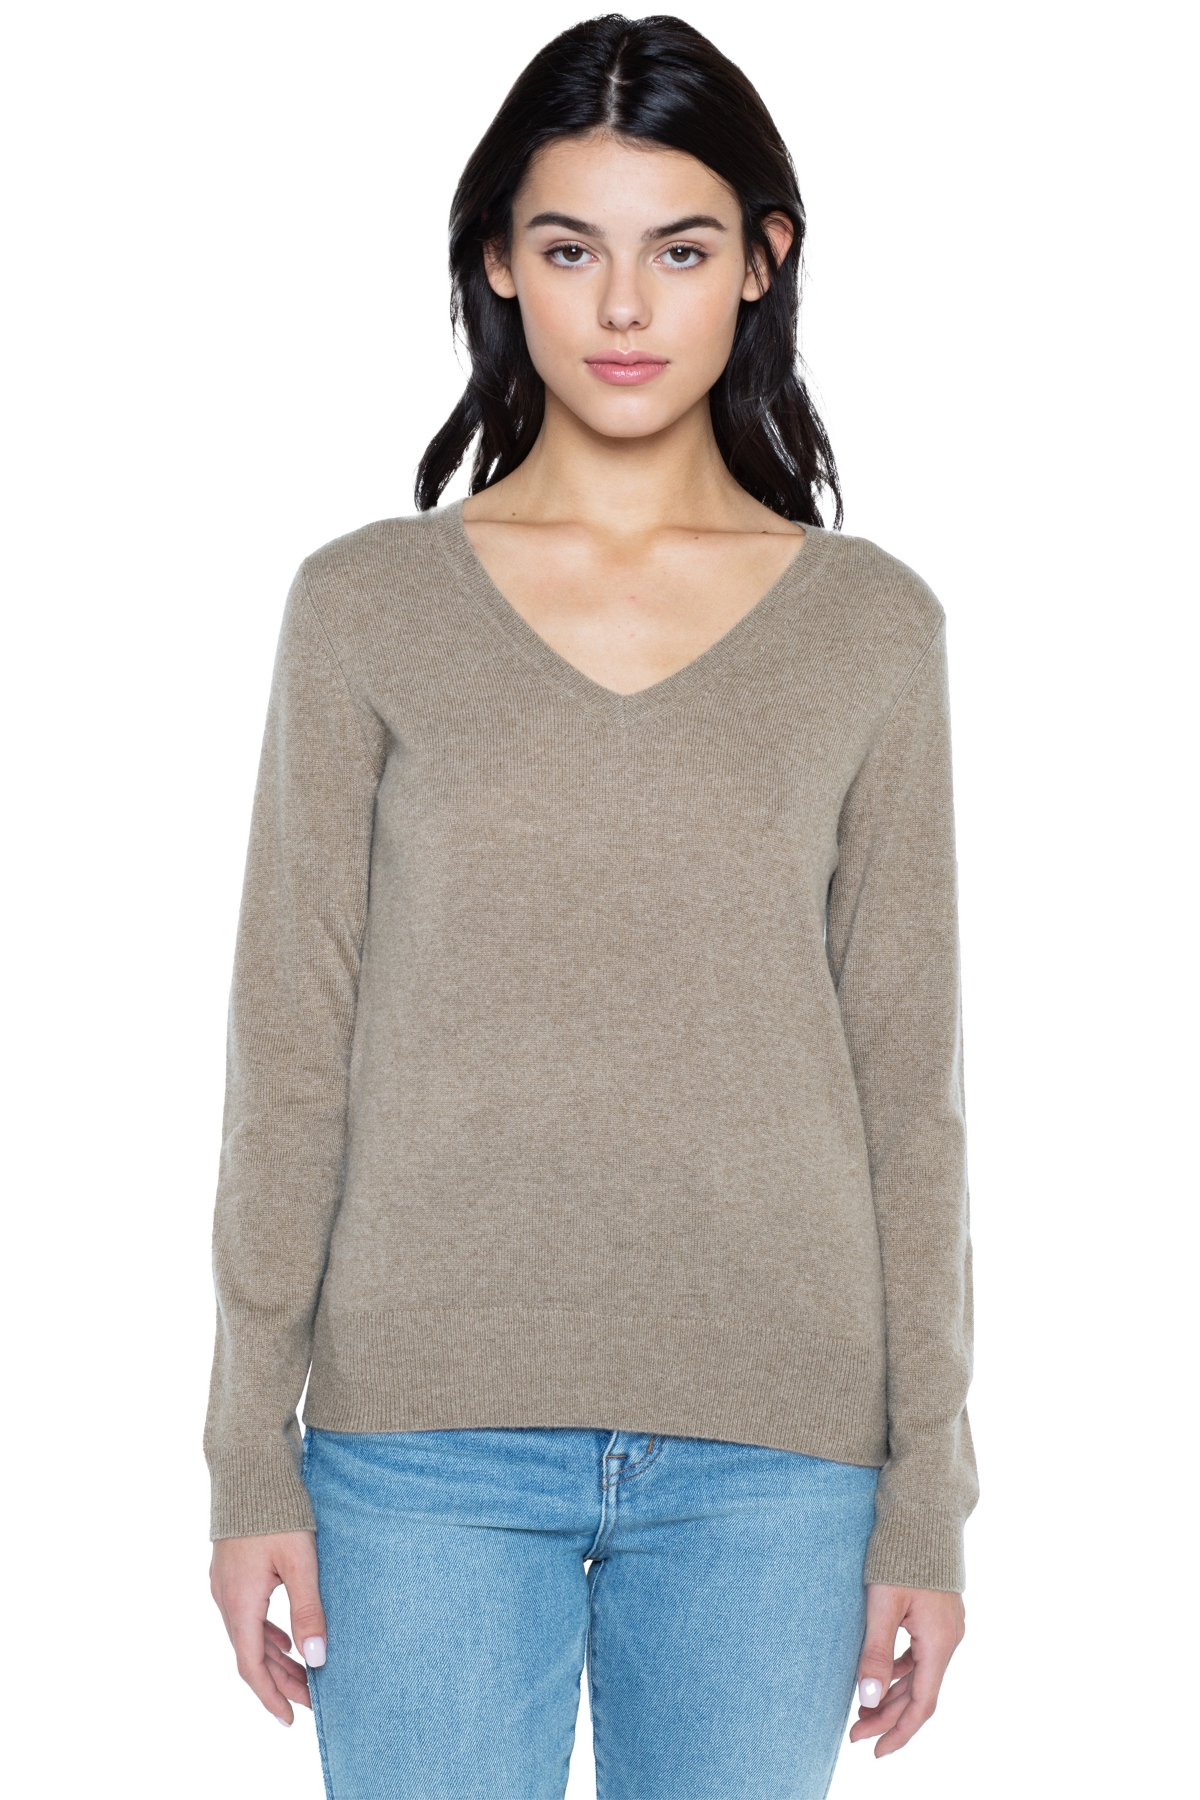 Women's 100% Pure Cashmere Long Sleeve Pullover V Neck Sweater - Toffee